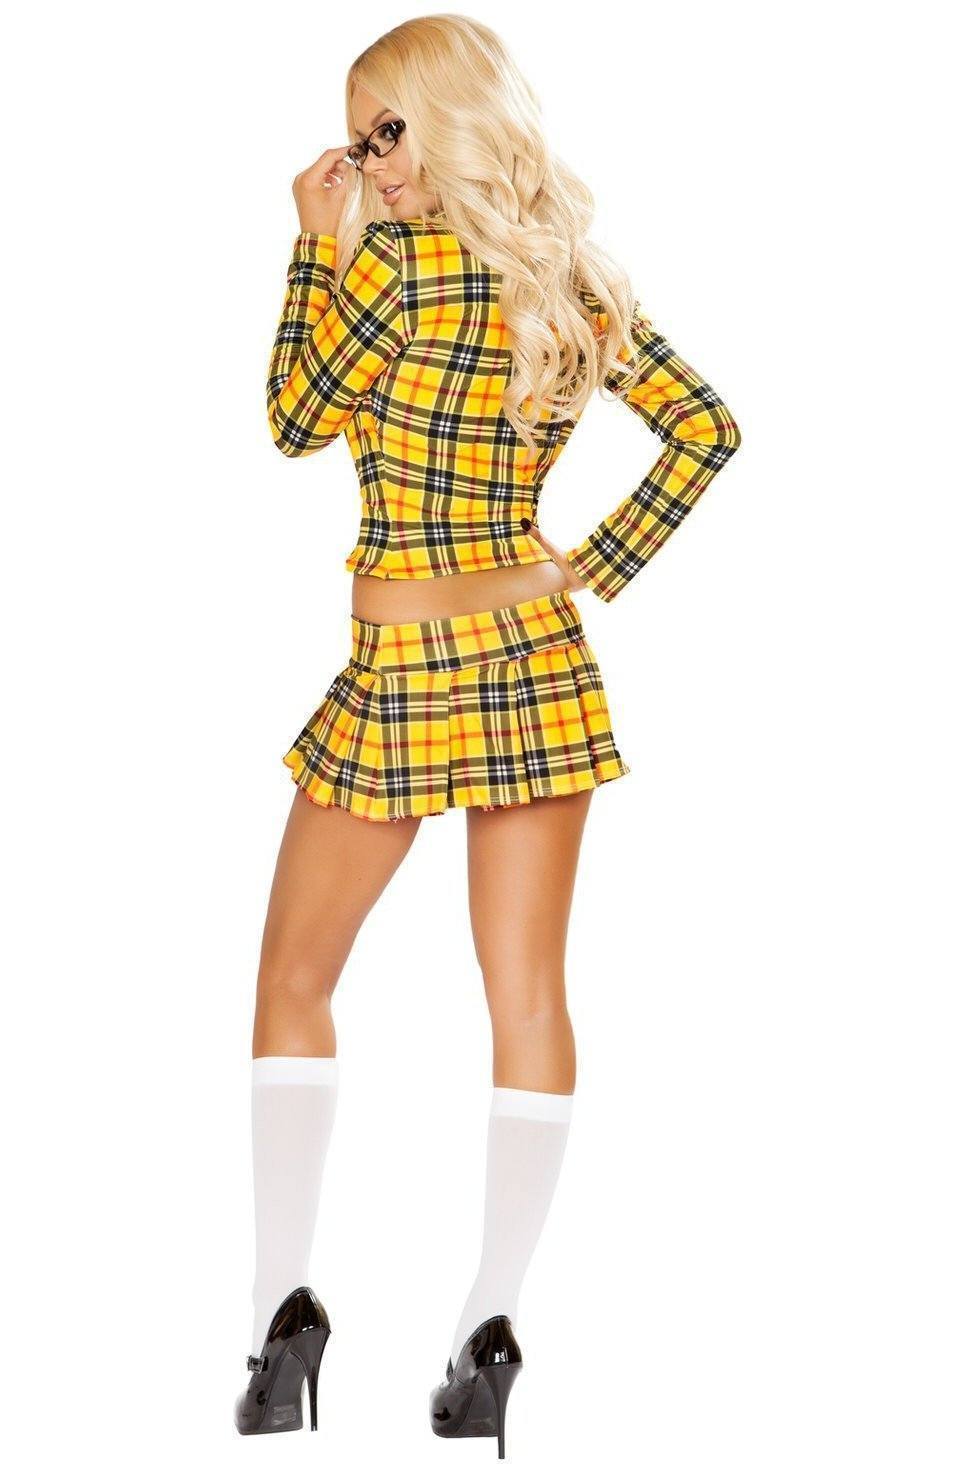 Roma School Girl without a Clue Costume-SEXYSHOES.COM